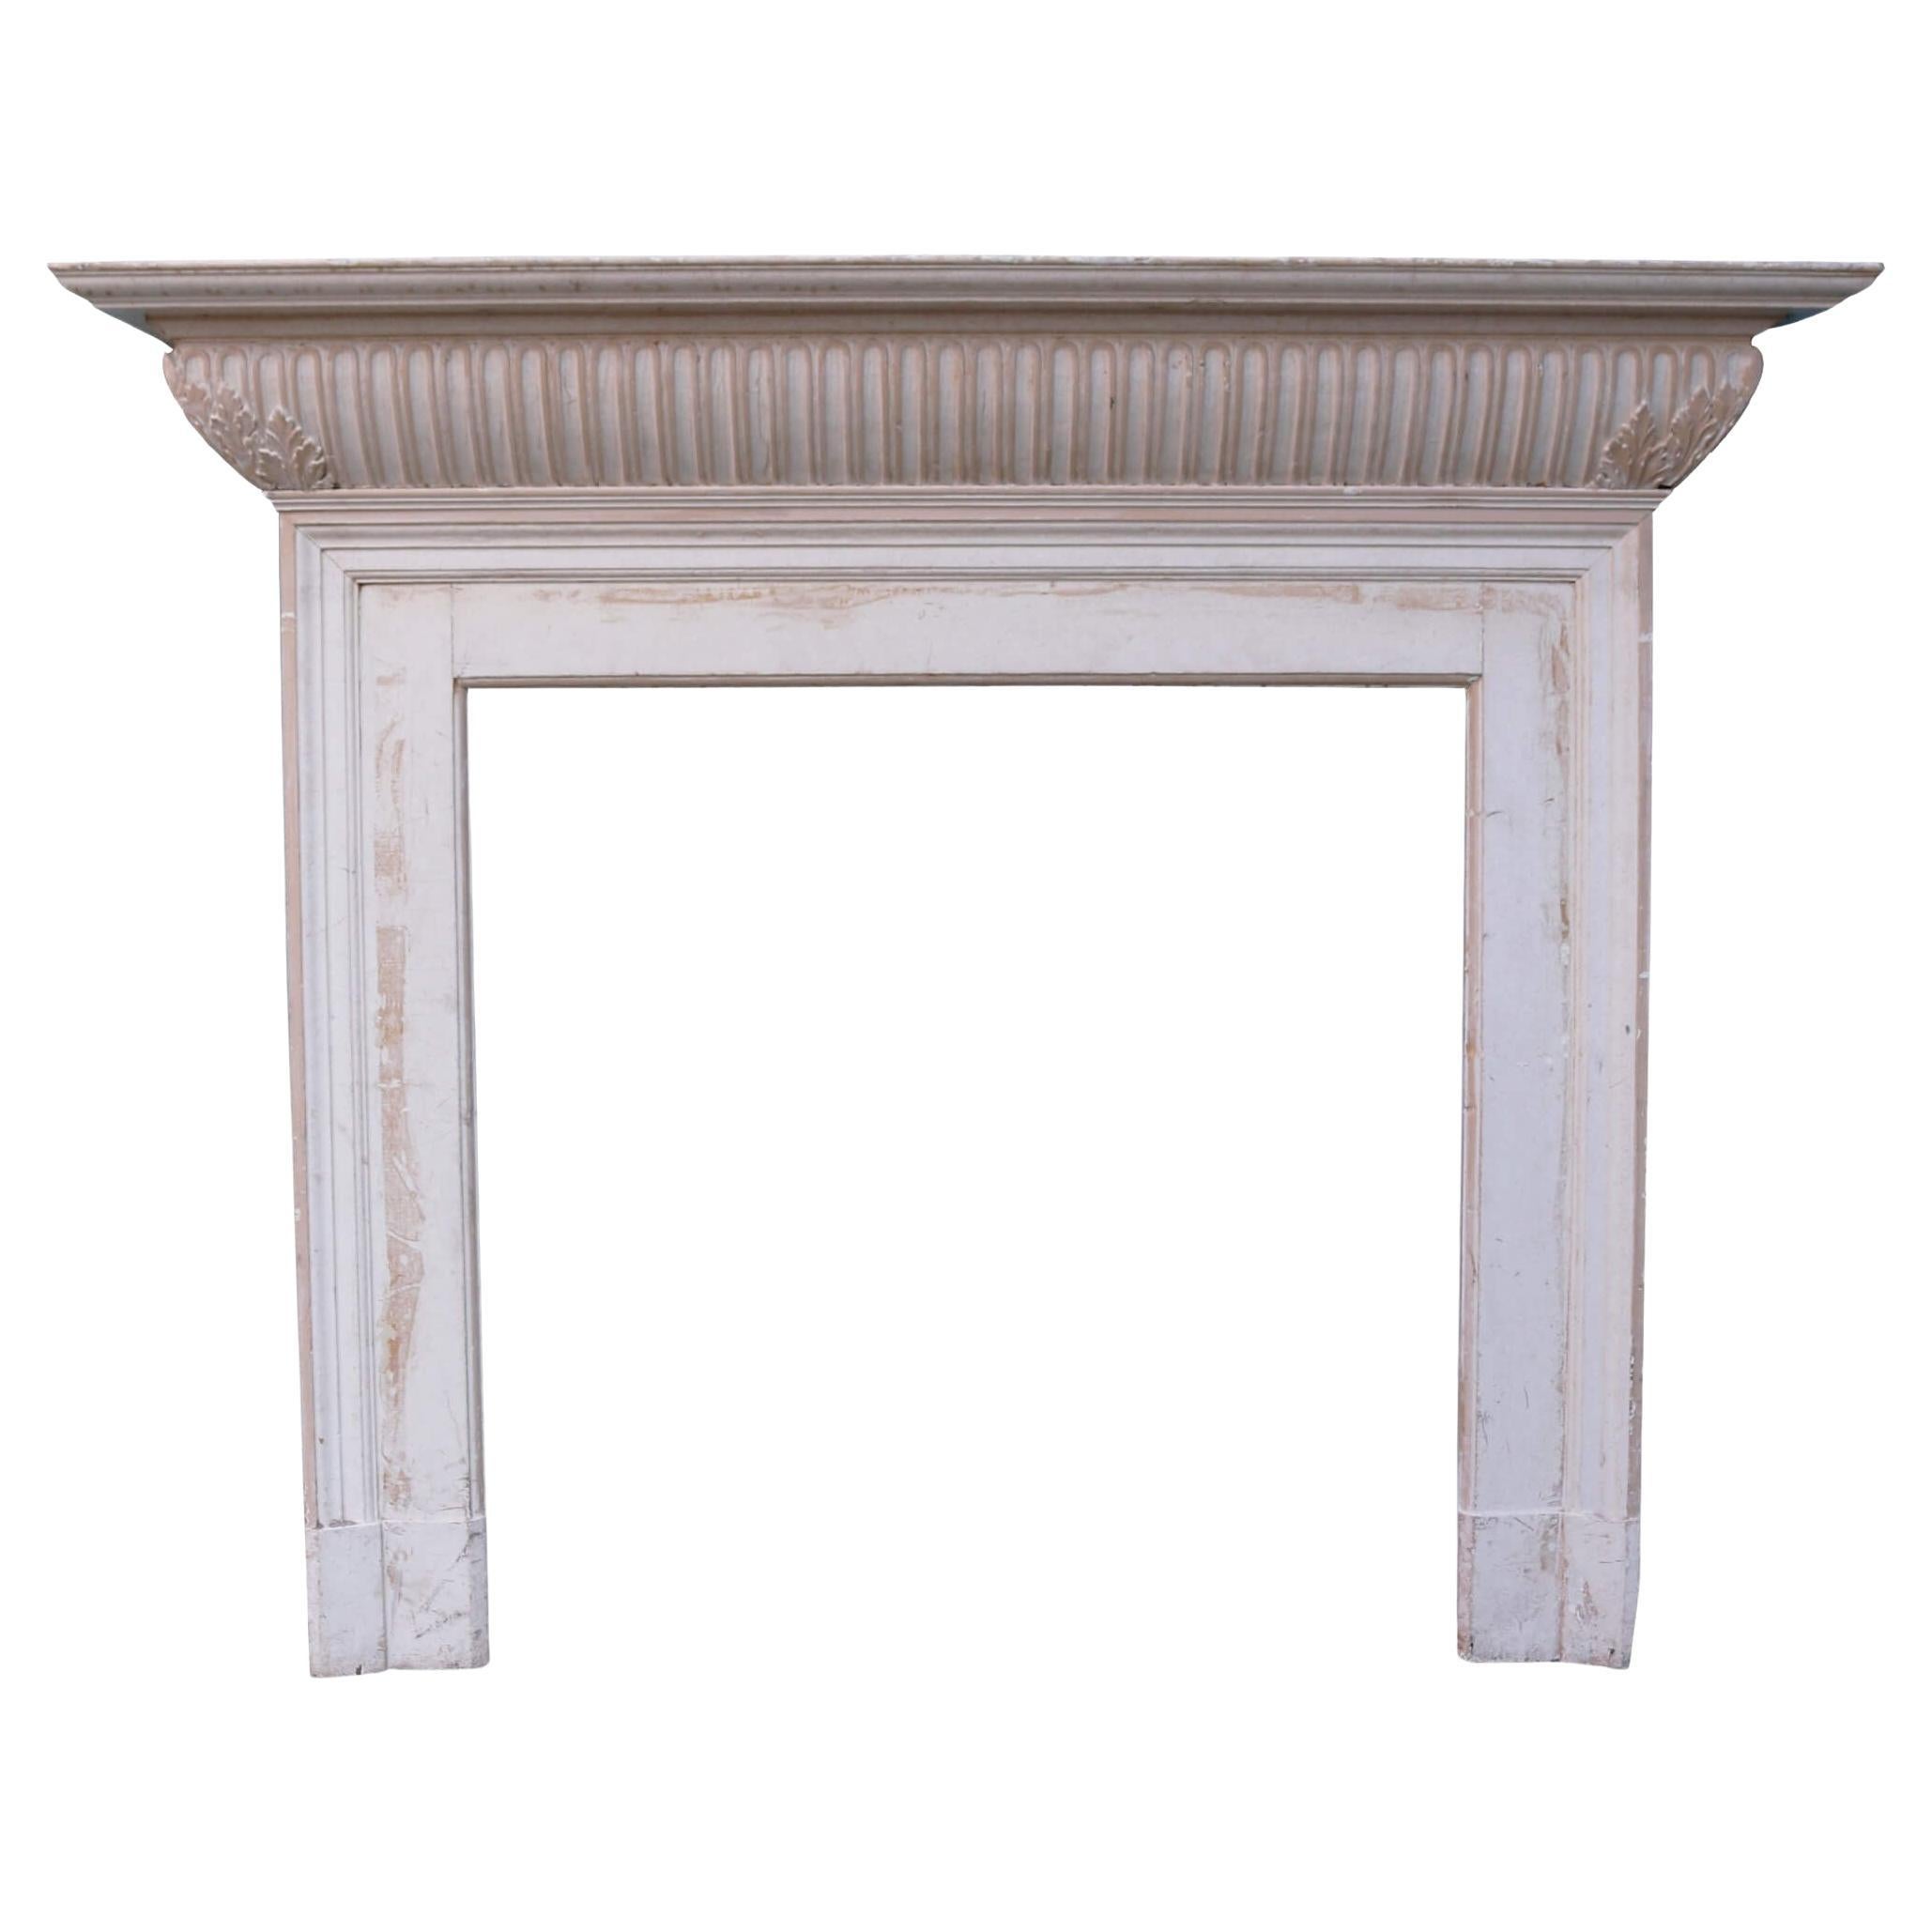 Painted Antique Fireplace Mantel Late 19th Century